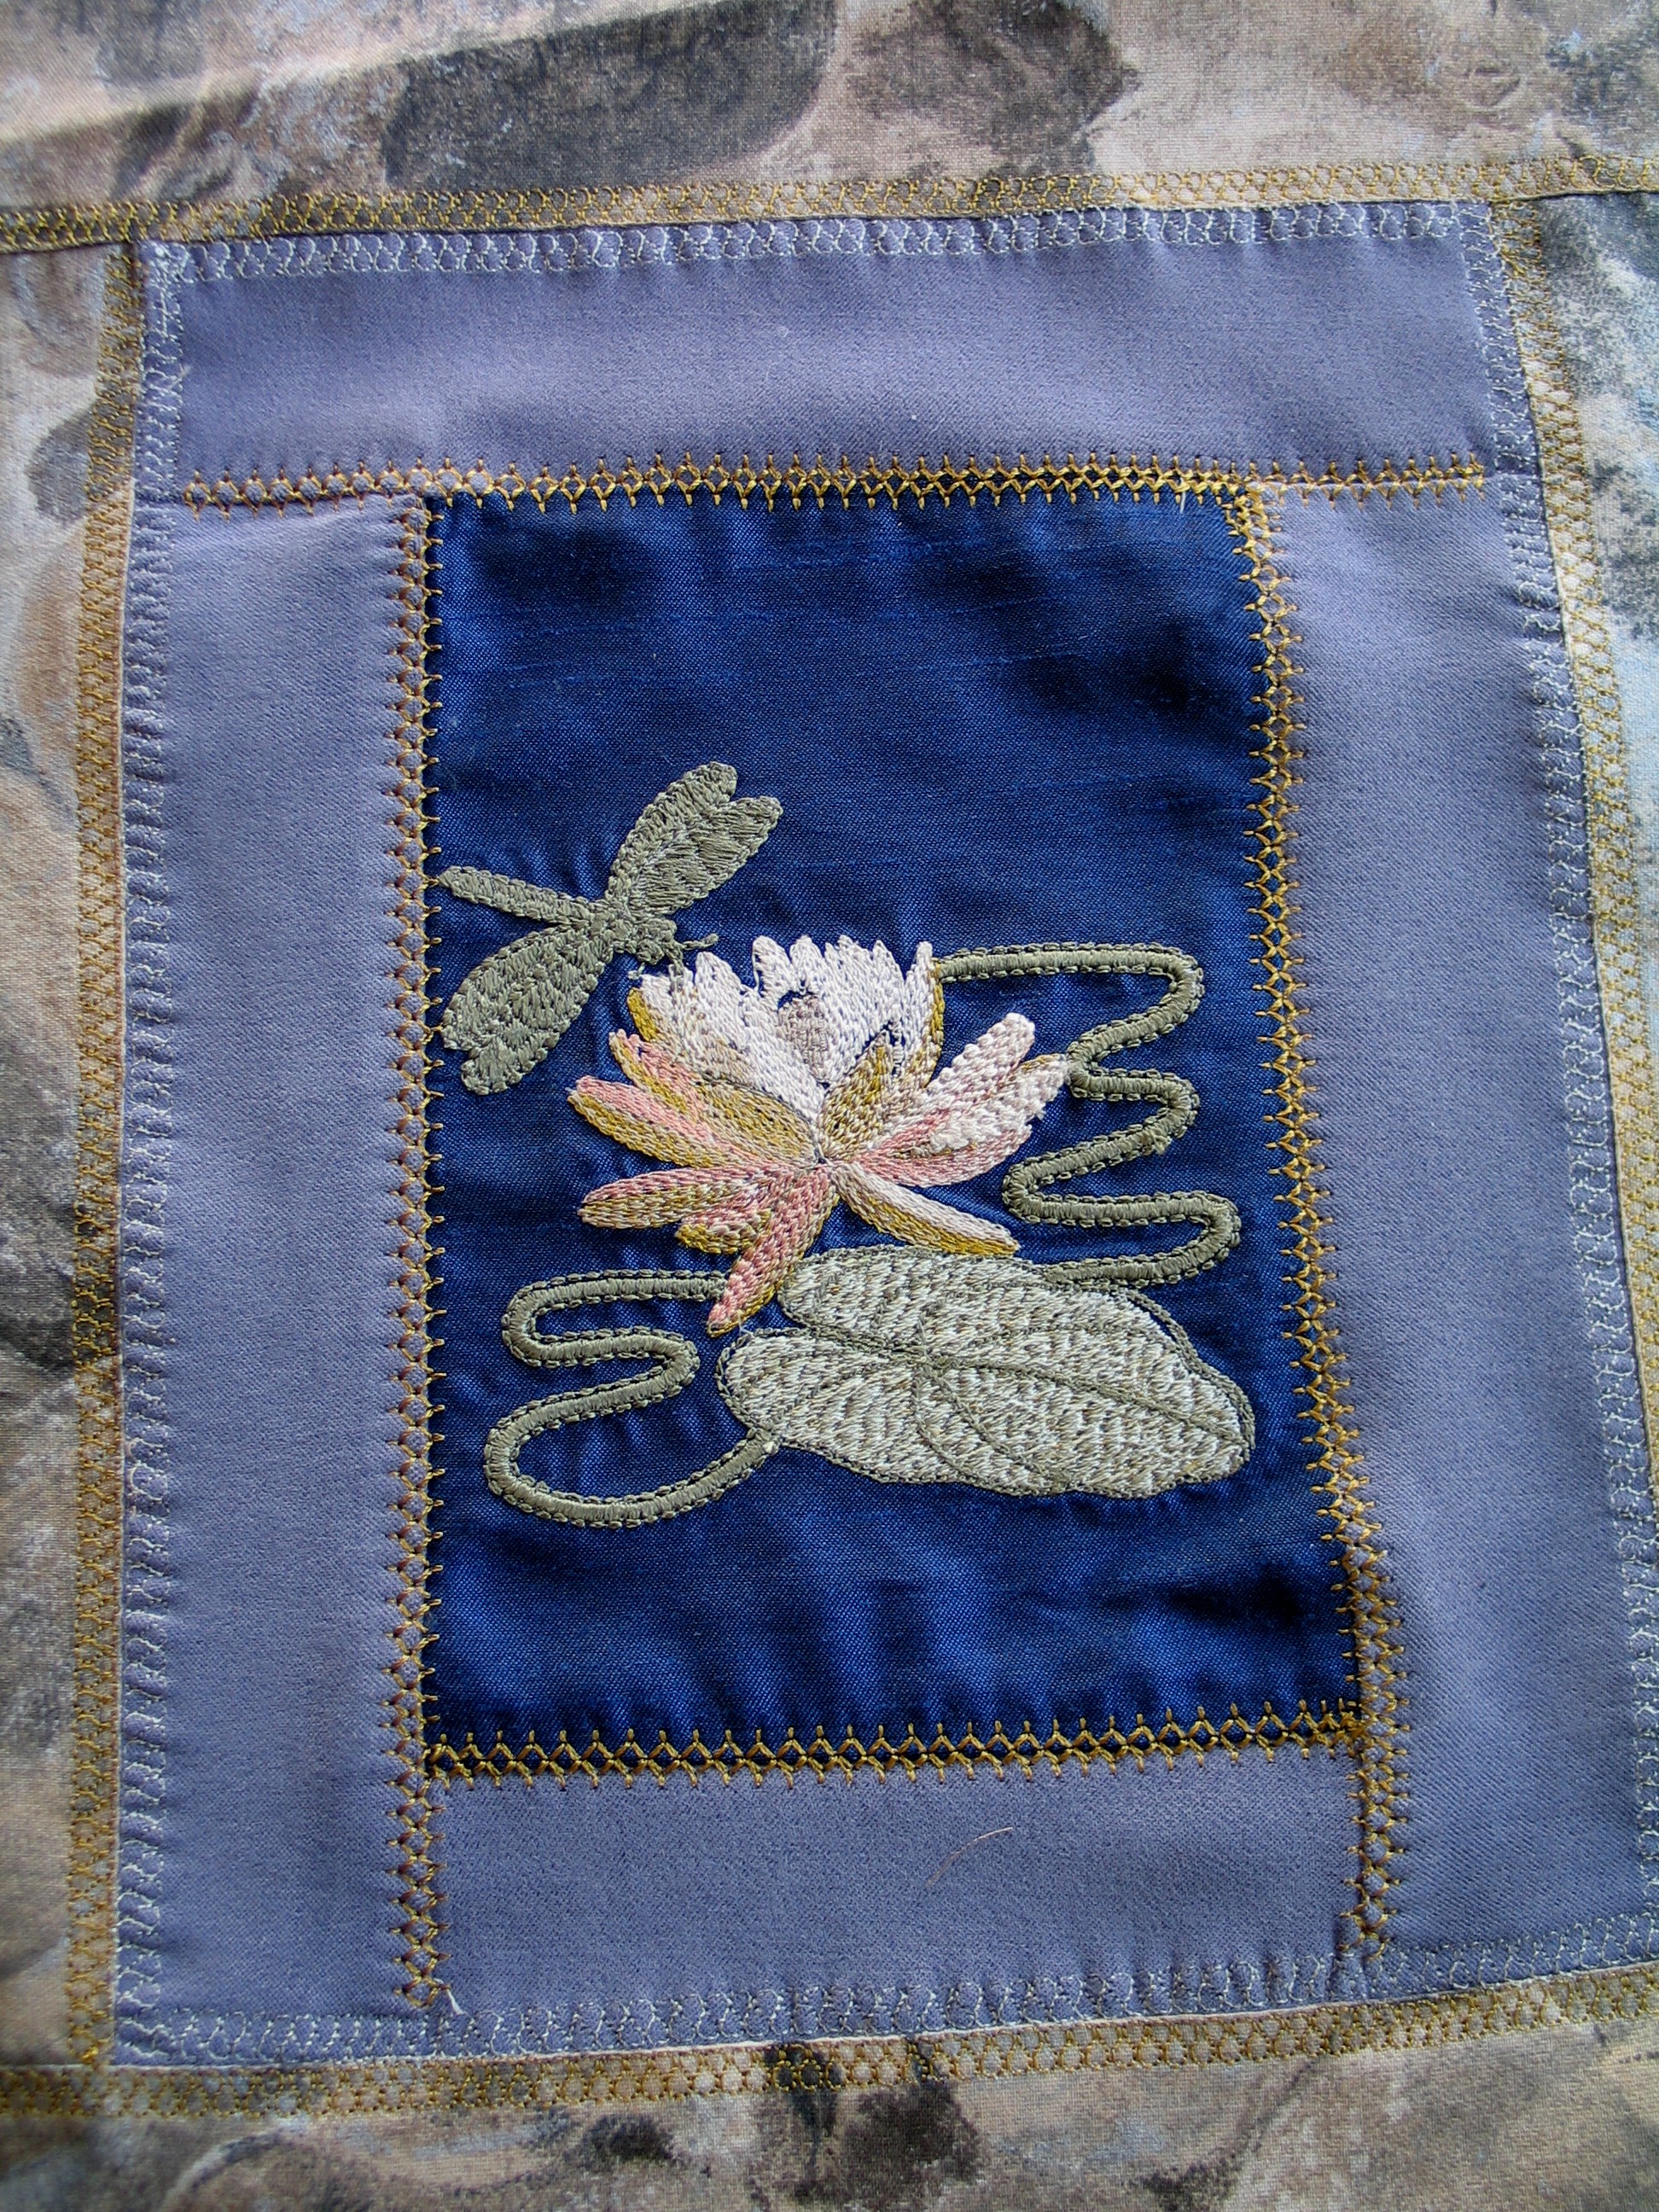 water-lily-embroidery